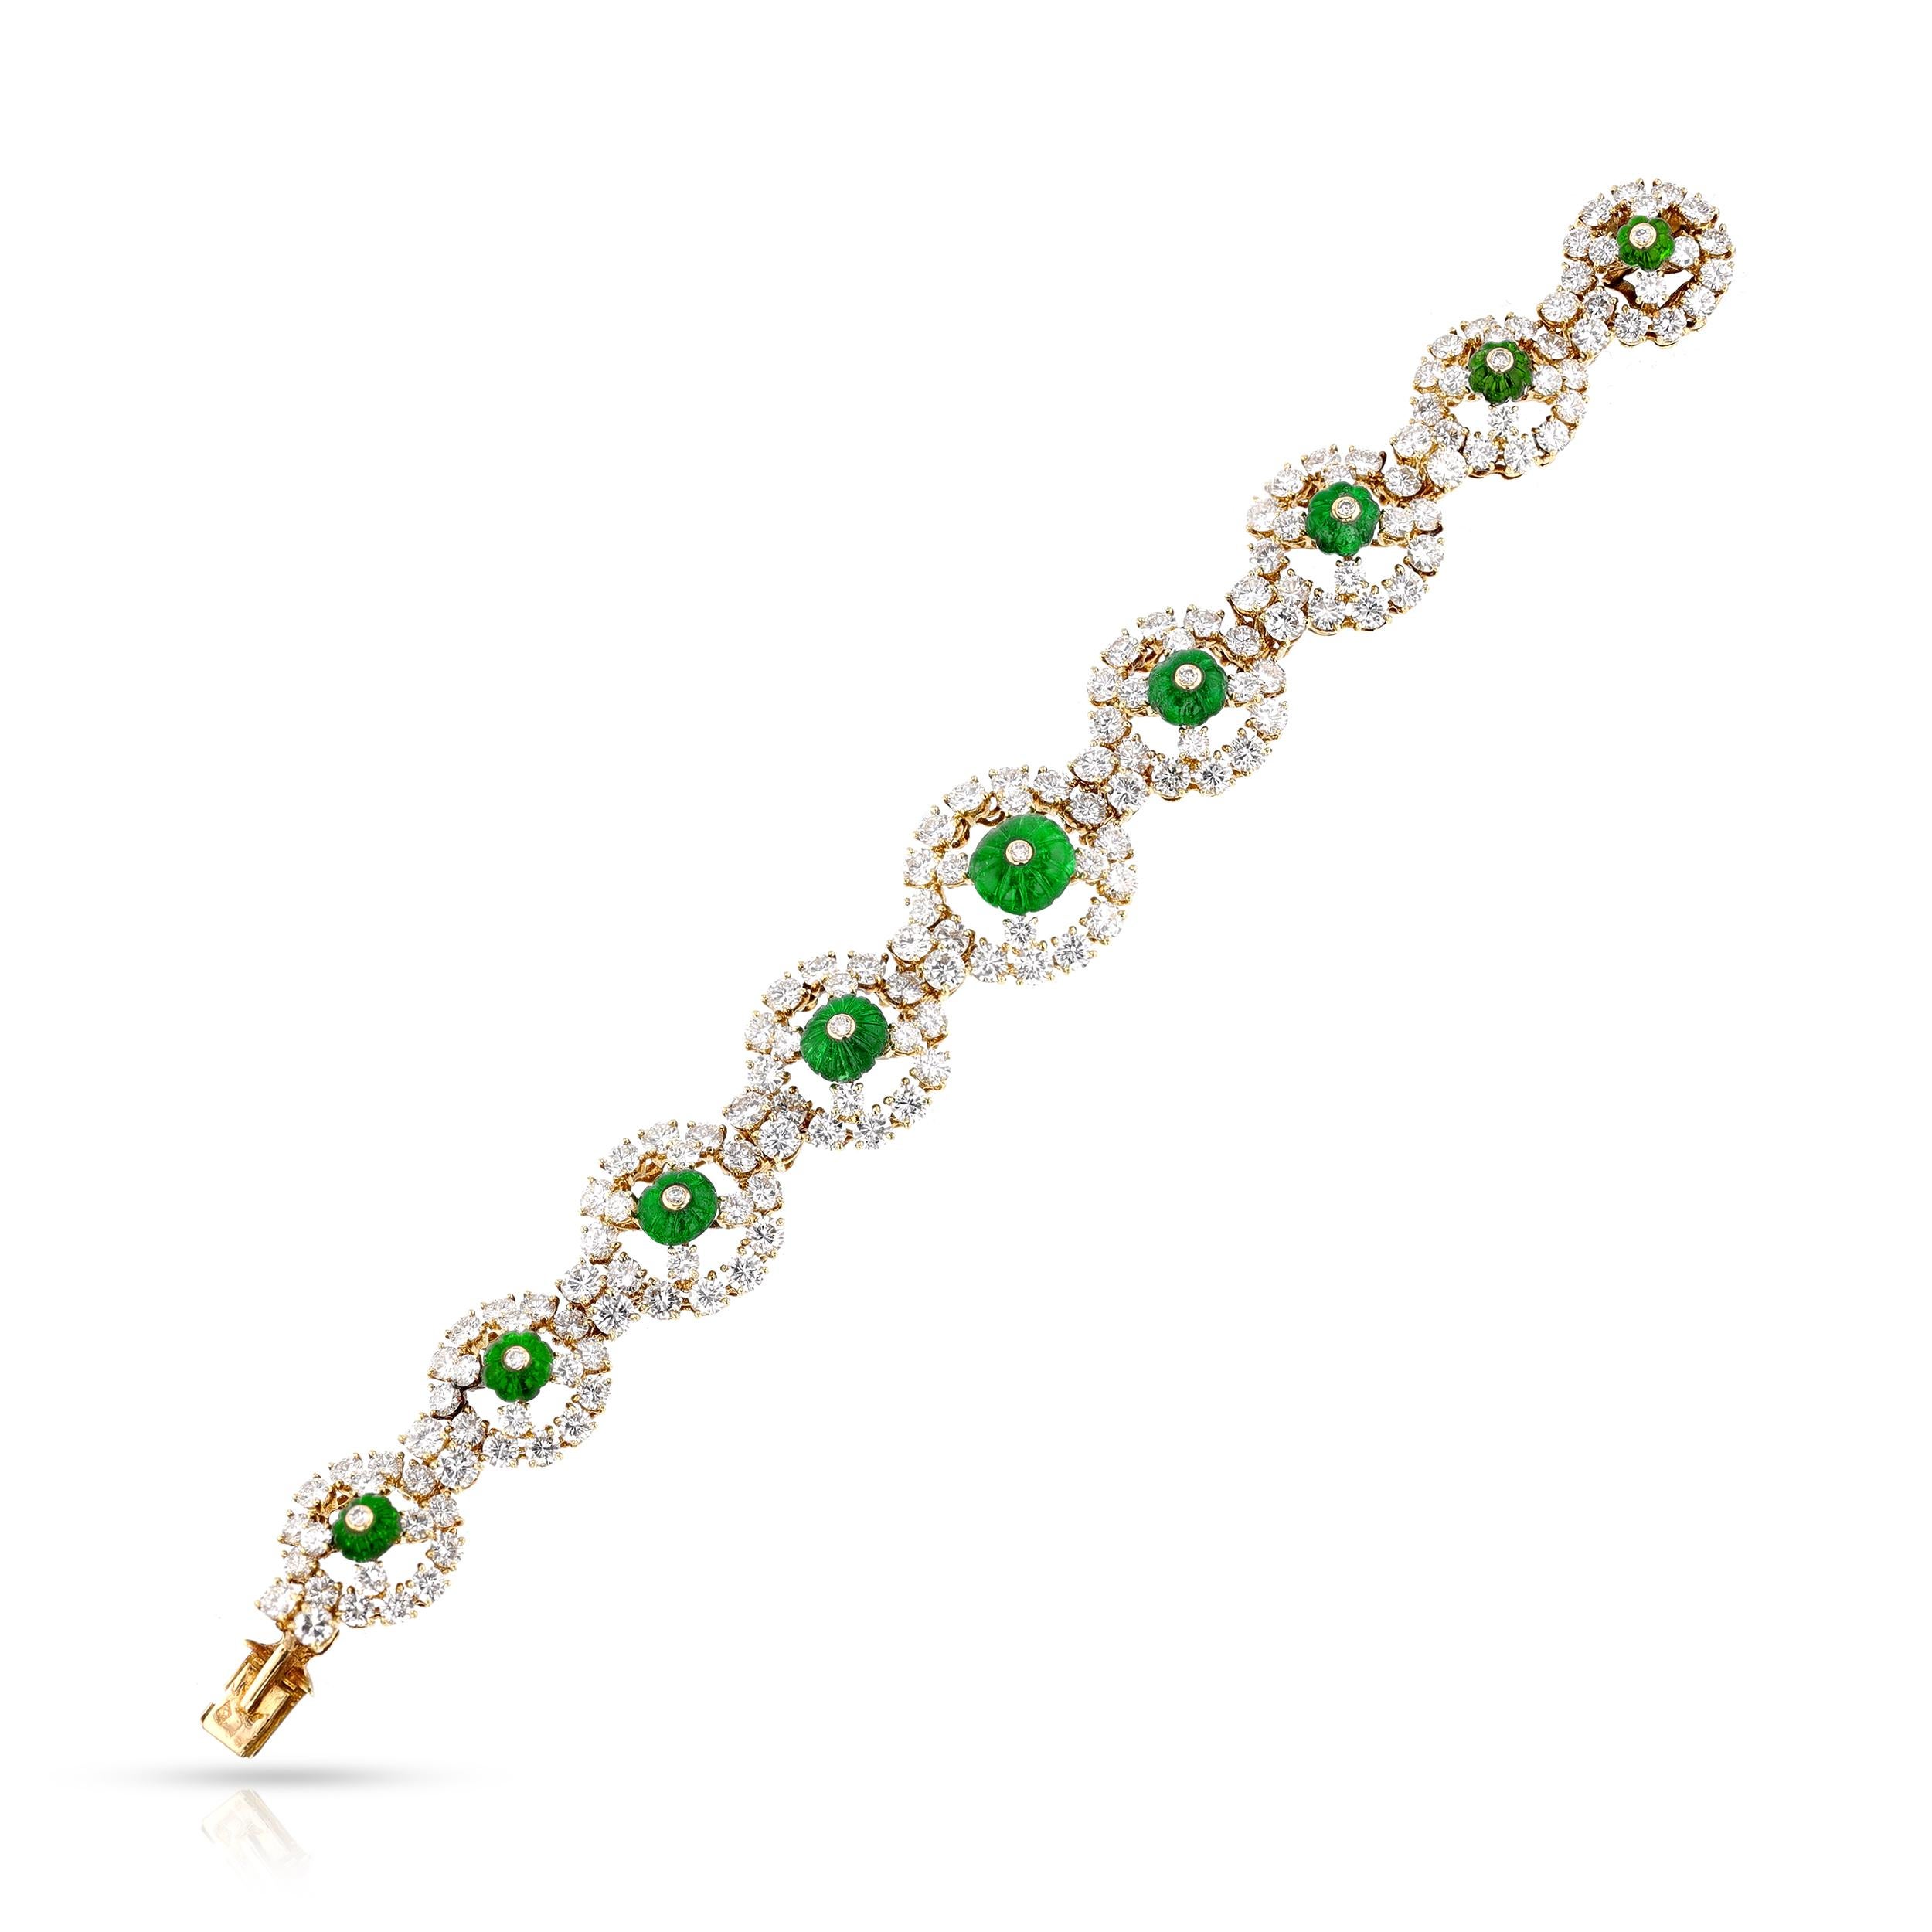 A beautiful Carved Emerald and Diamond Bracelet by Alexandre Reza. The bracelet has nine size-graduating round links, each set with a carved emerald in the center surrounded by brilliant-cut diamonds and round brilliant cut diamonds. The total